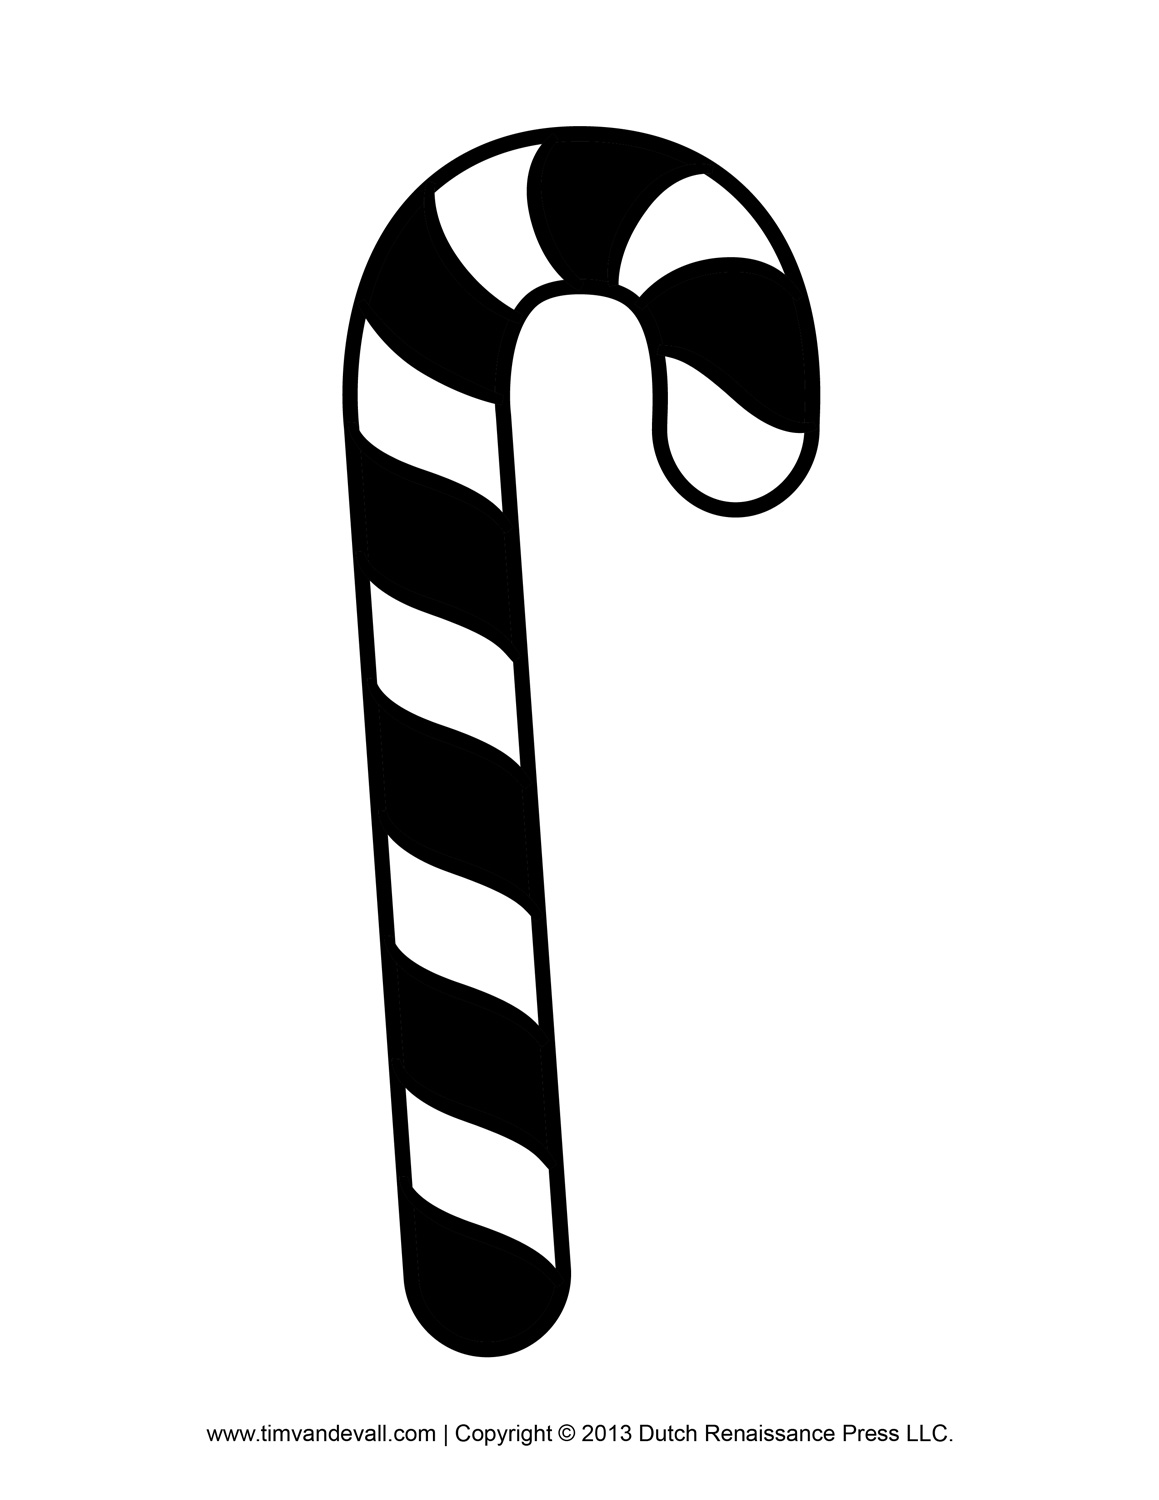 Social Studies Clipart Black And White Candy Cane Black And White Jpg